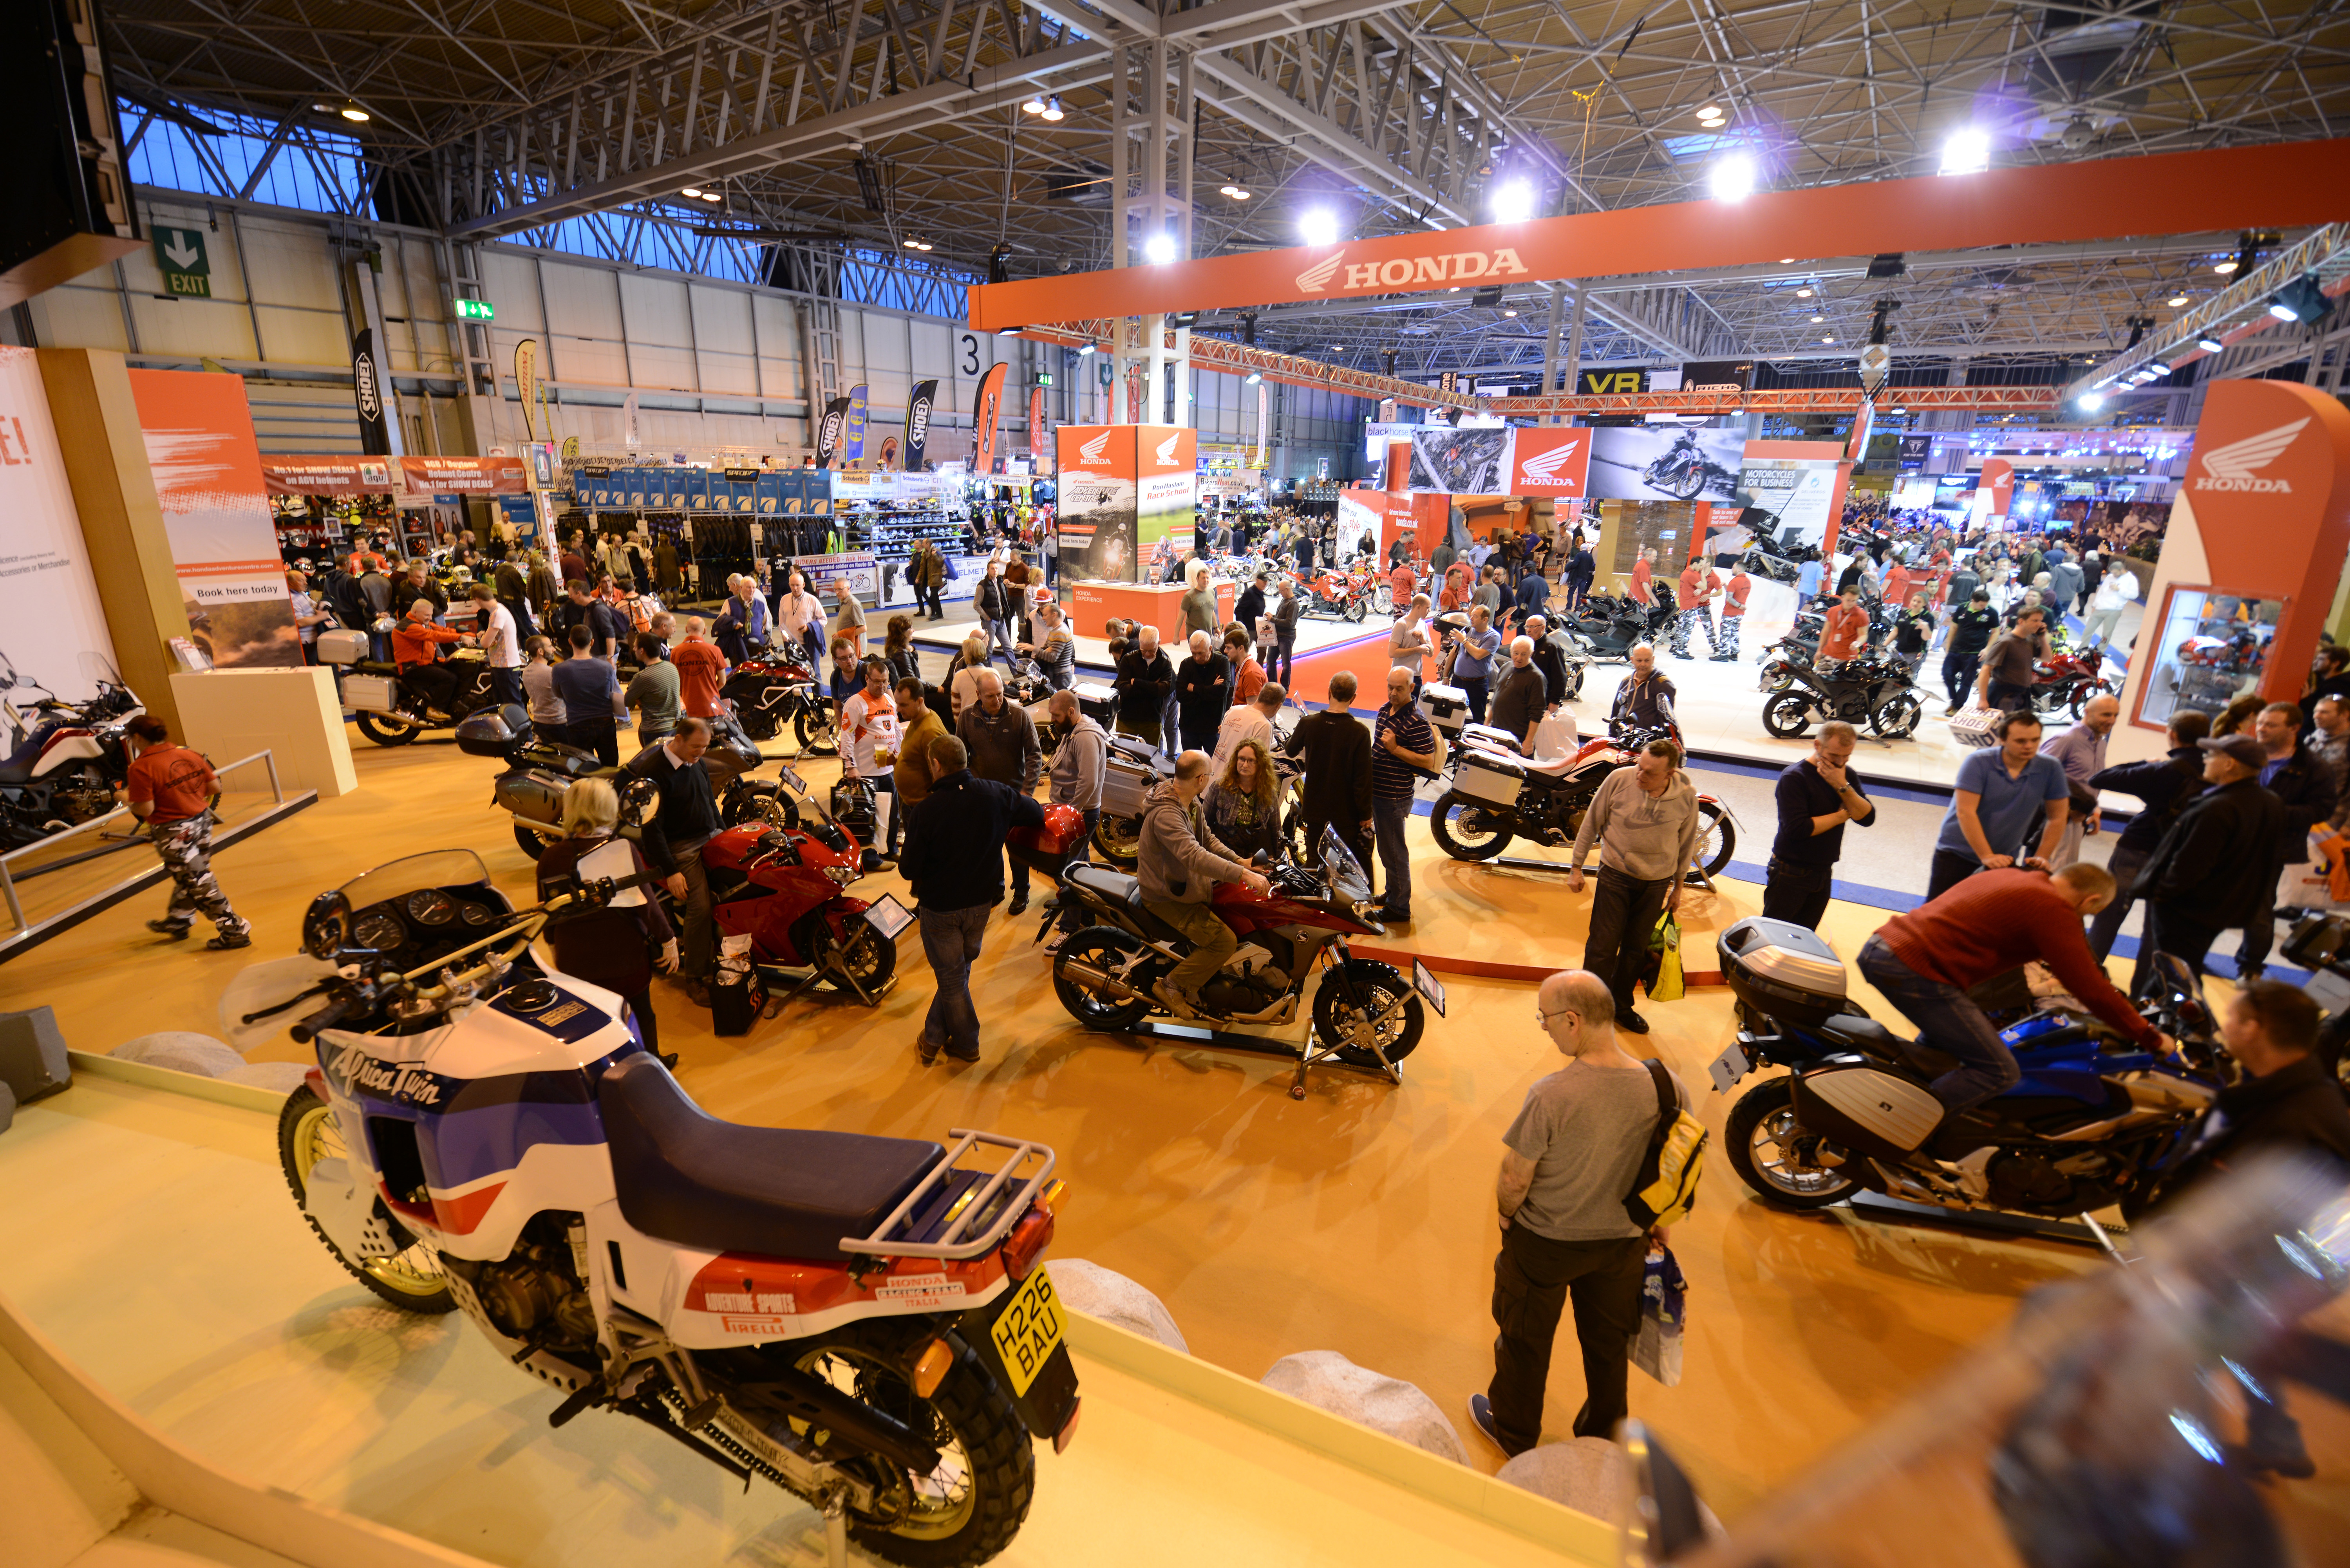 We’ve got two pairs of Motorcycle Live tickets to give away!